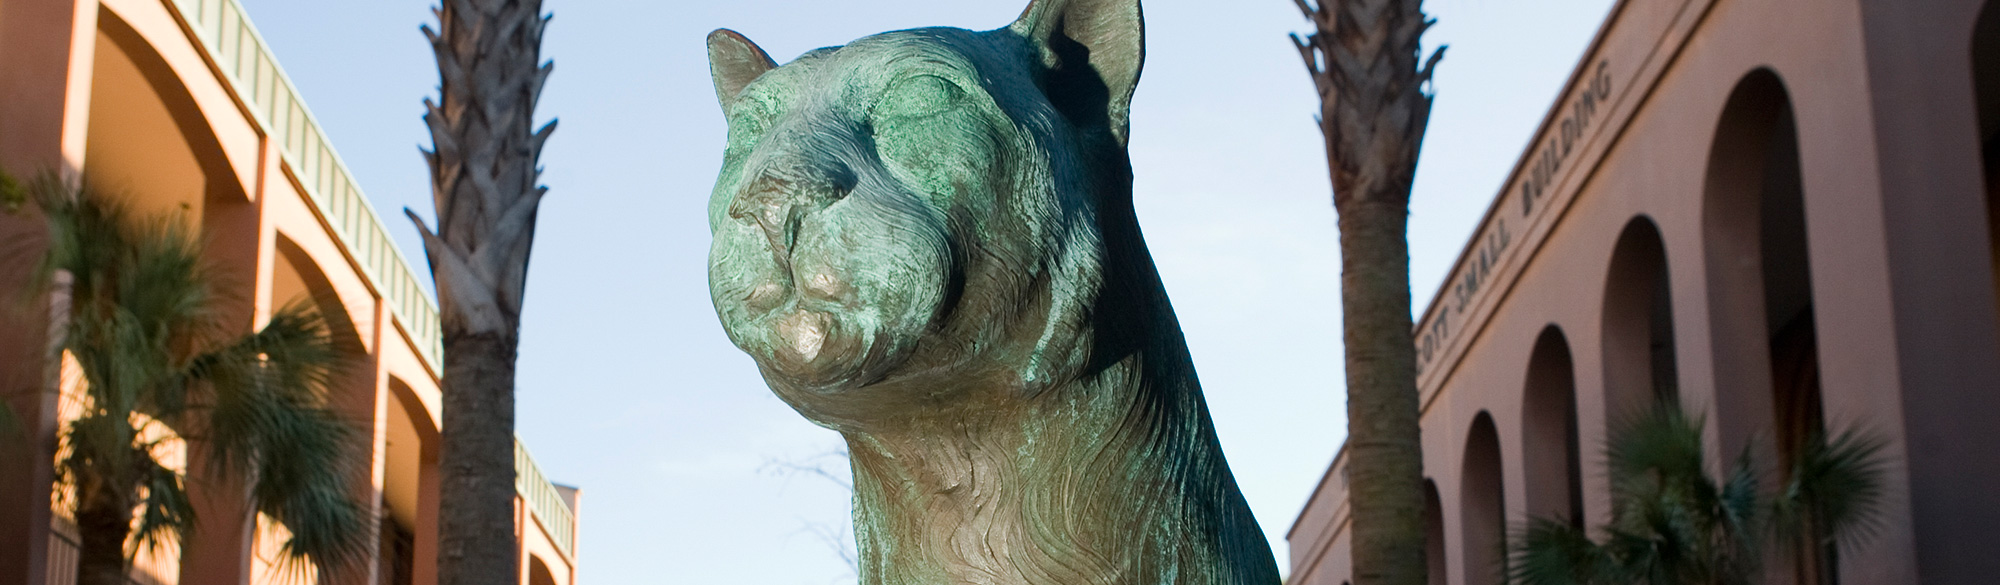 Cougar Statue at Cougar Mall of the College of Charleston campus